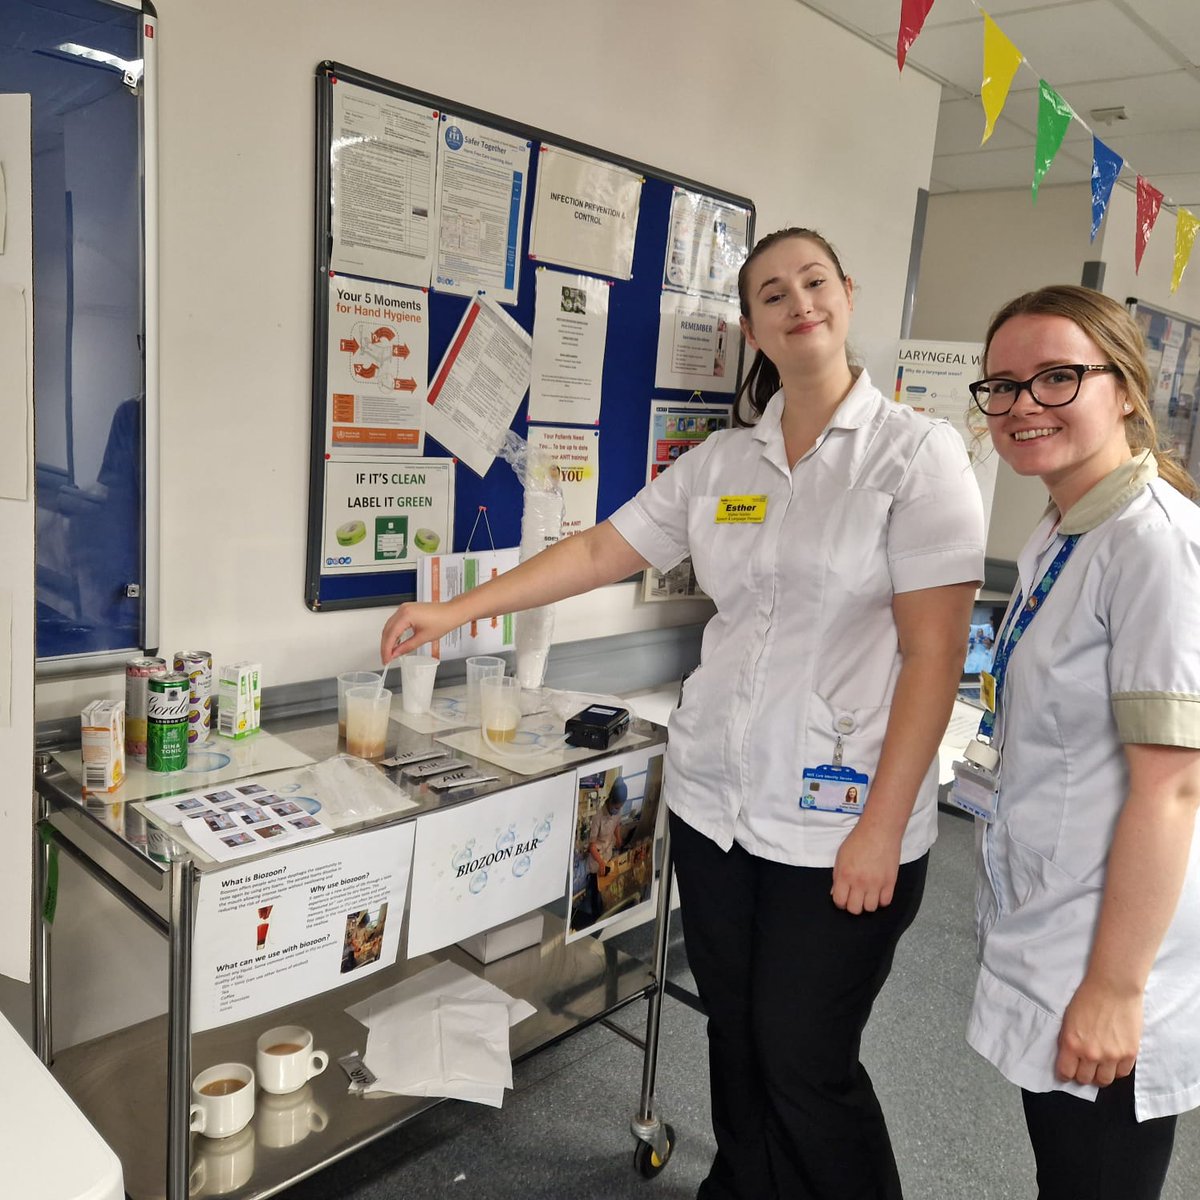 Fantastic event today in @UHNM_NHS Critical Care for
#ICURehabDay23

Thanks to everyone that supported ❤️ sharing our passion for #ICUrehab 
And celebrating our fantastic #MDT

@SamCook_RD @chloebullock_1 @EstherNortonSLT @JoSteele1977 @AshYouLikeIt @ICUdietitian